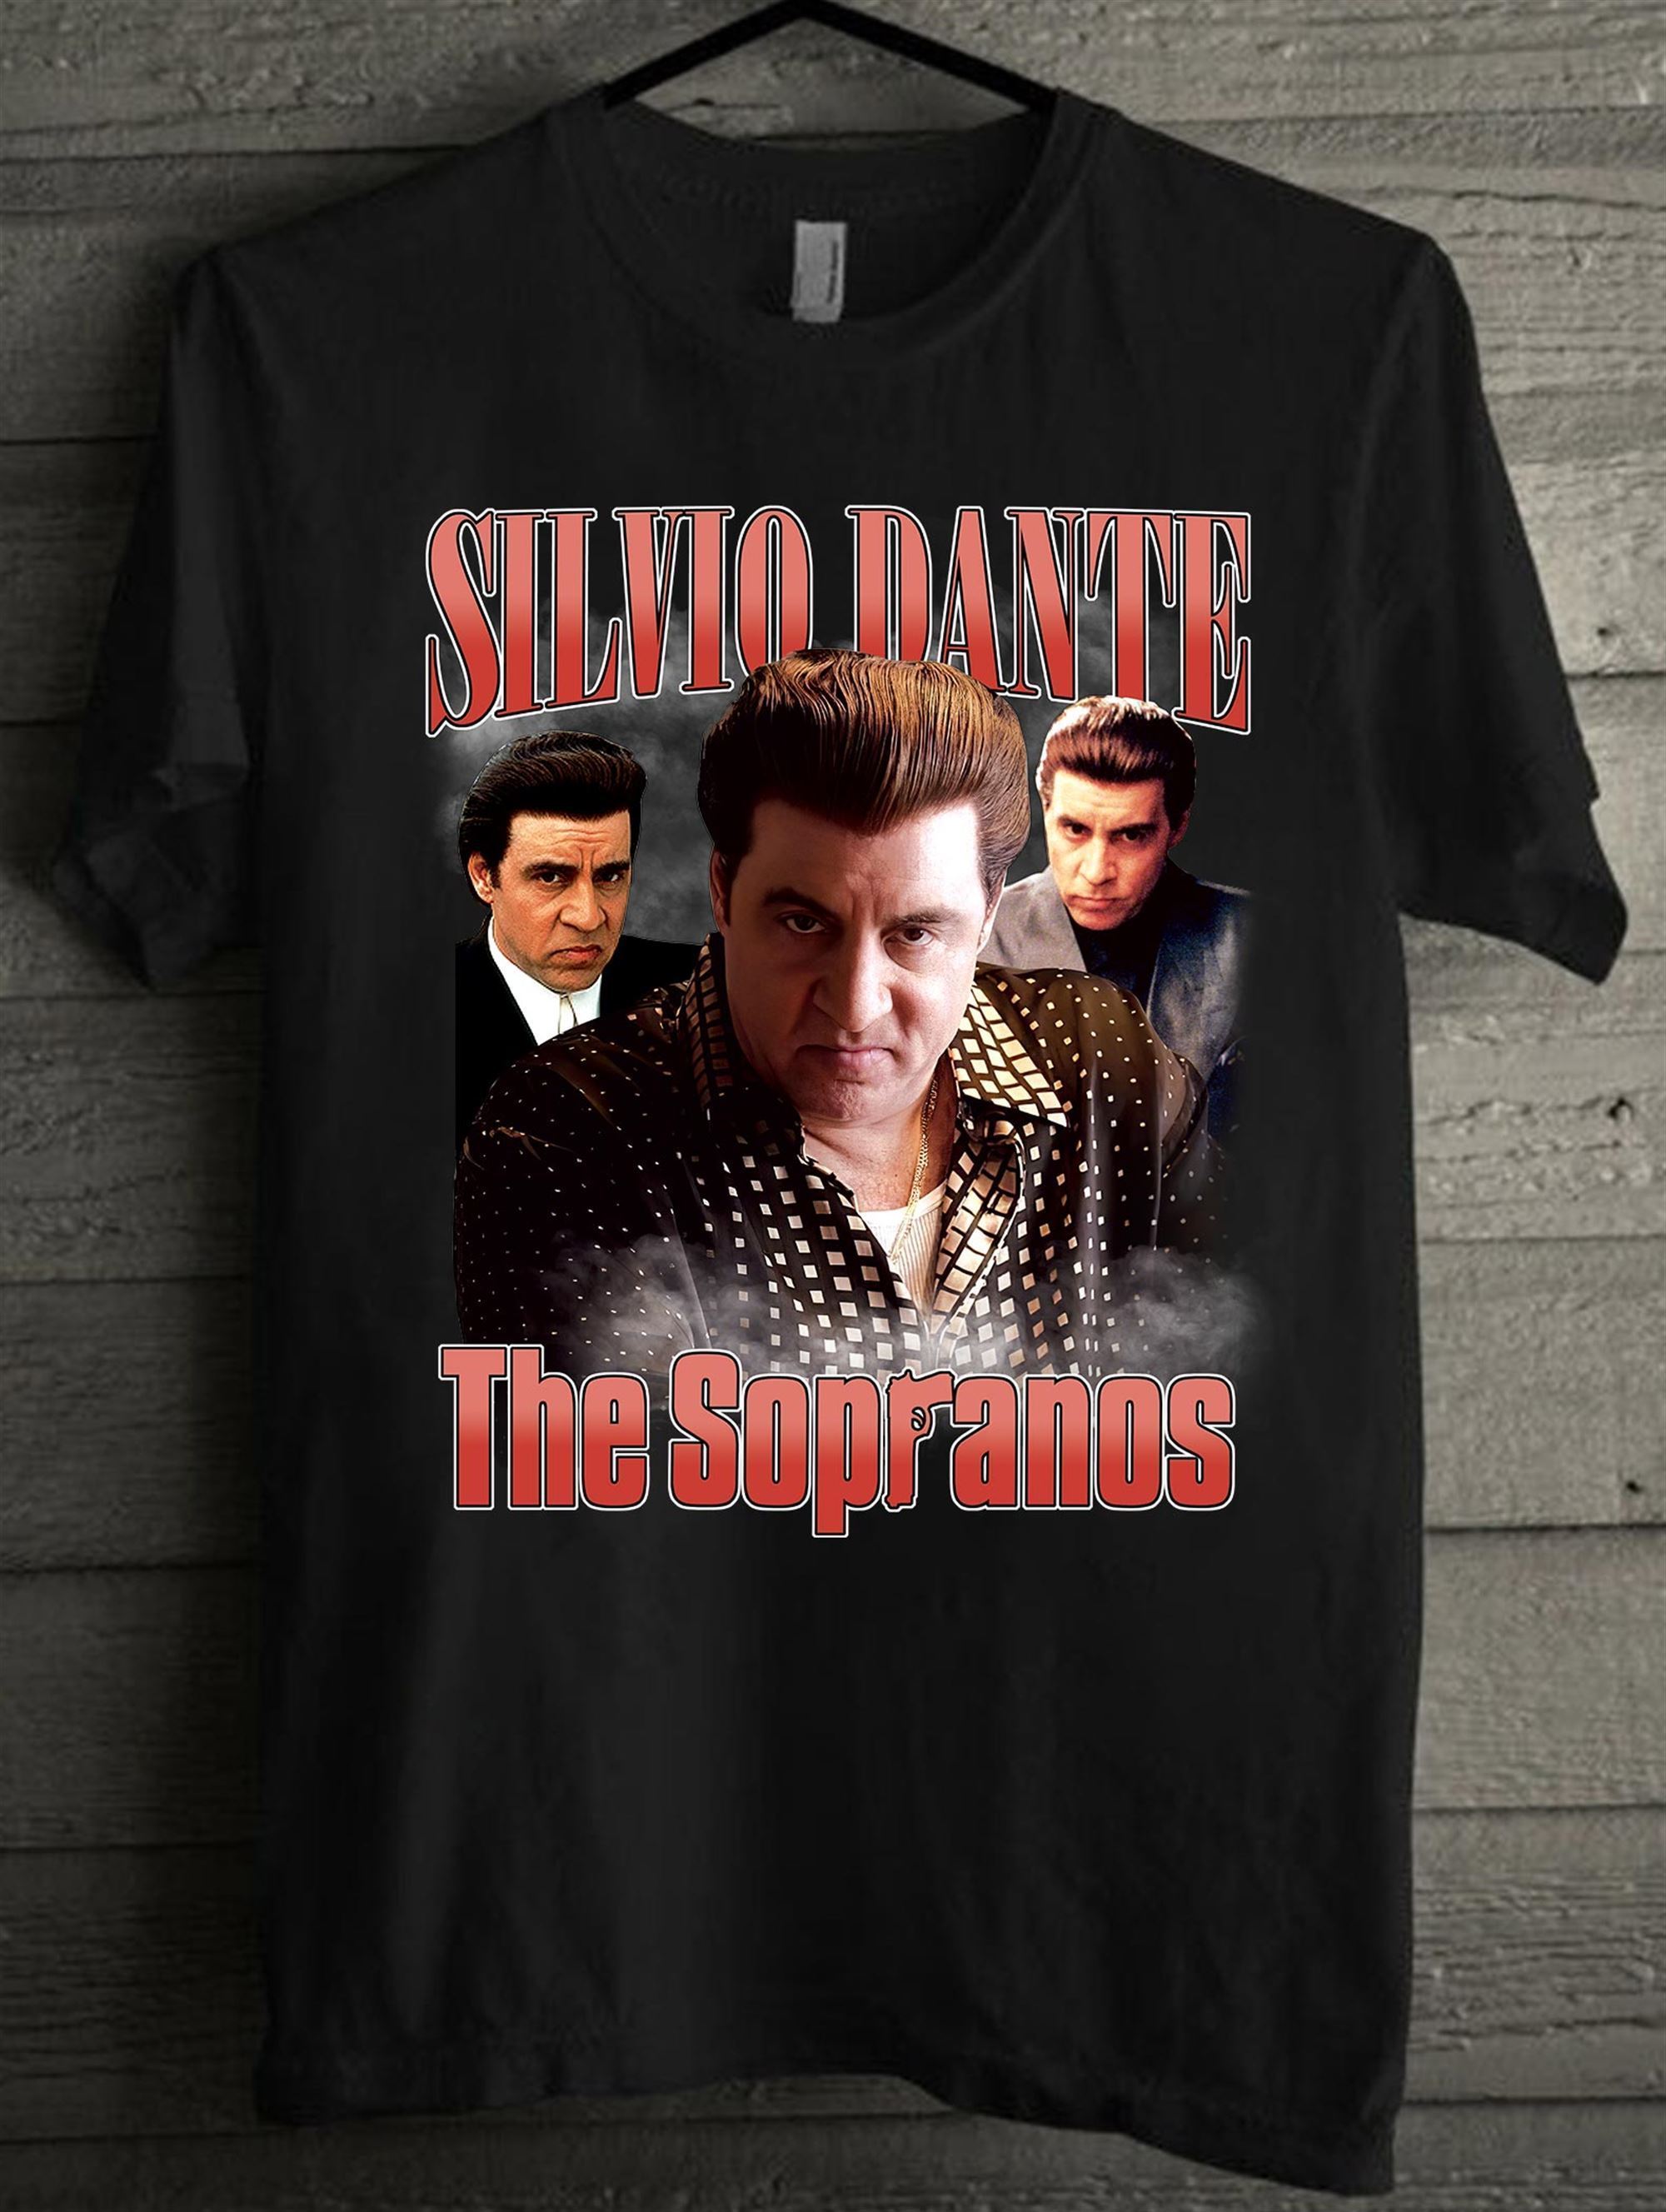 Silvio Dante T Shirt The Sopranos Homage T Shirt Sopranos Vintage 90s T Shirt Full Size Up To 5xl Full Size Up To 5xl